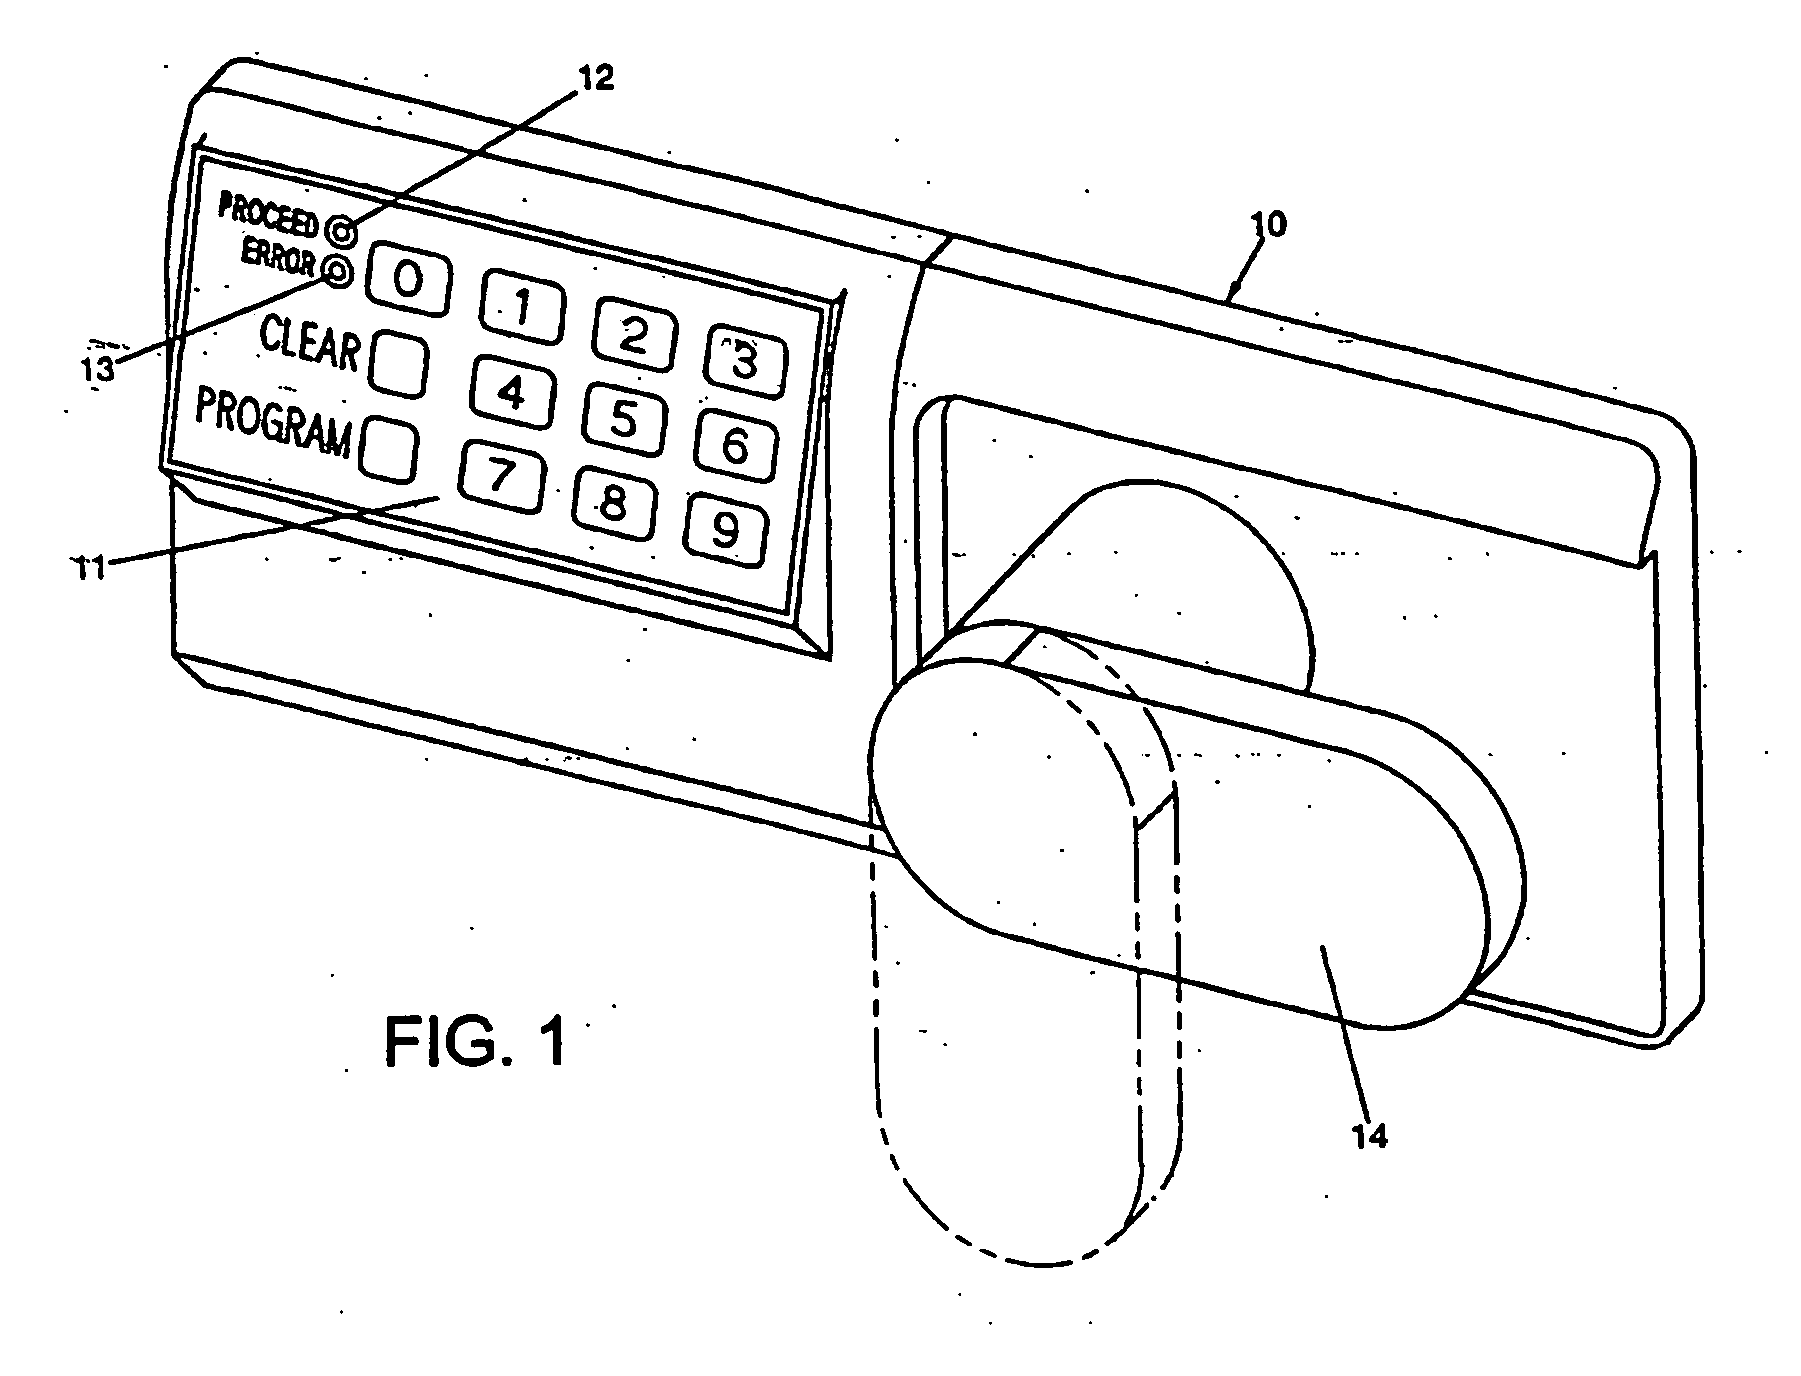 Electronic access control device